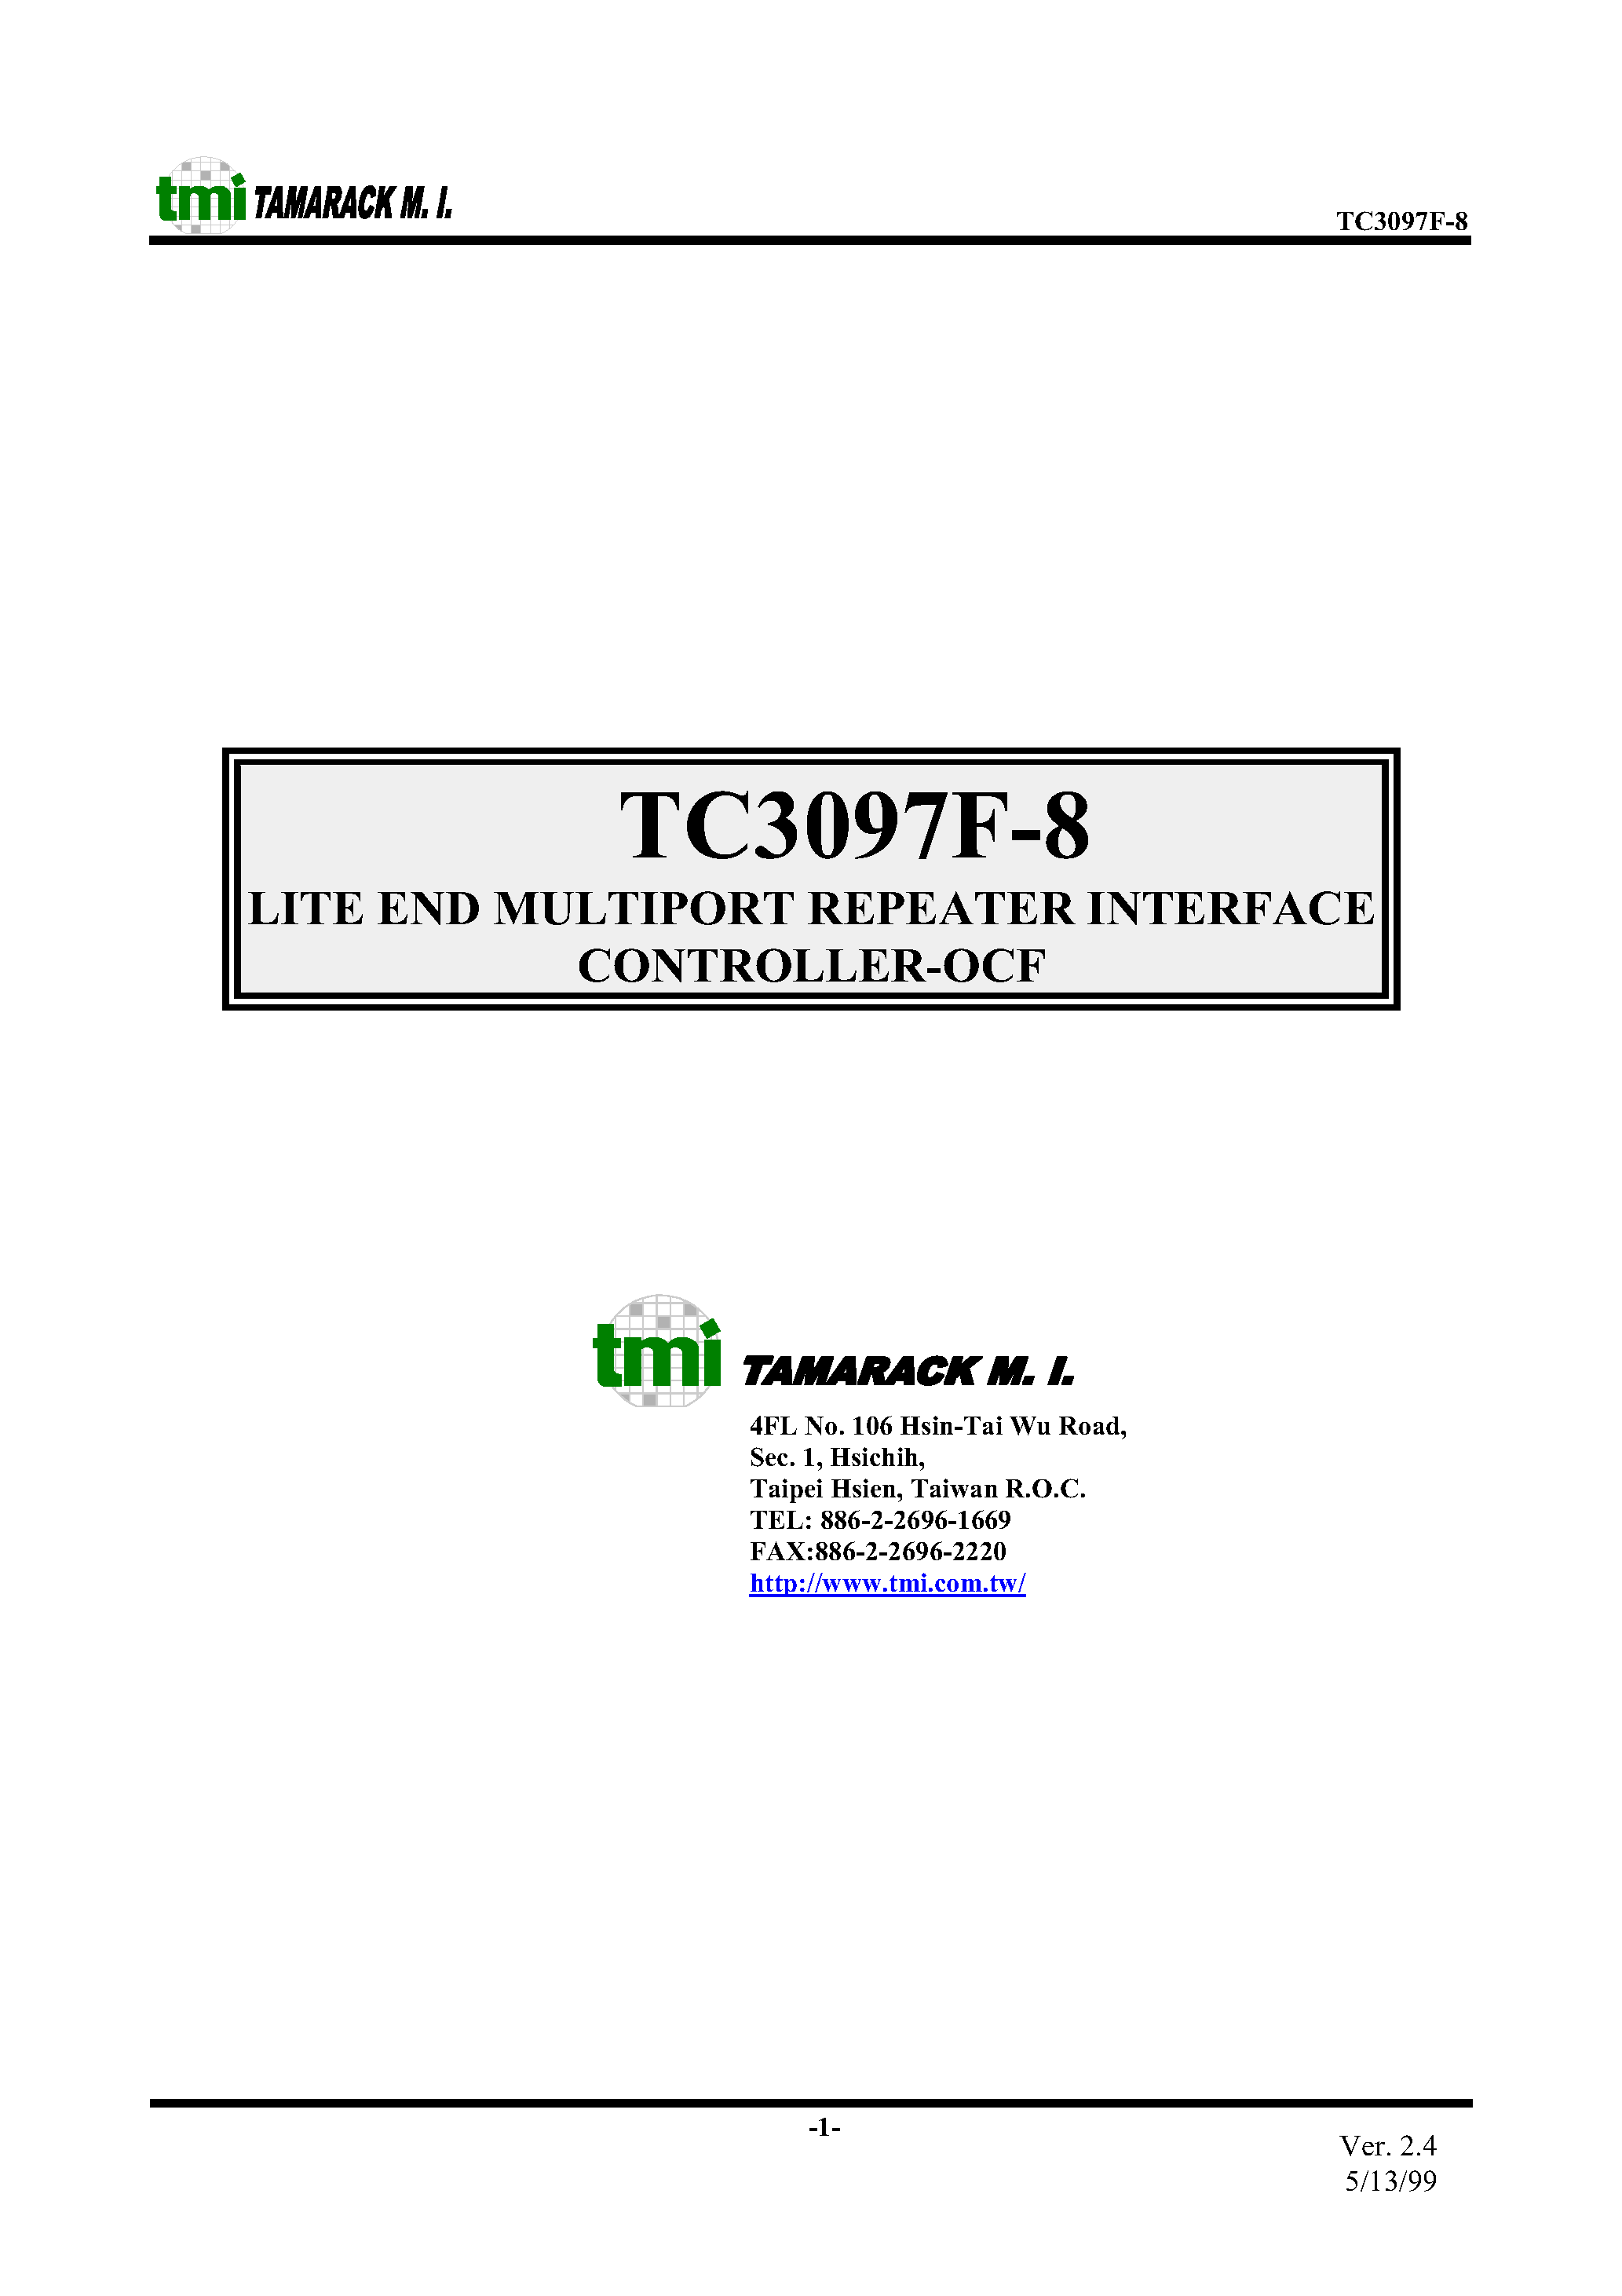 Даташит TC3097F-8 - LITE END MULTIPORT REPEATER INTERFACE CONTROLLER - OCF страница 1